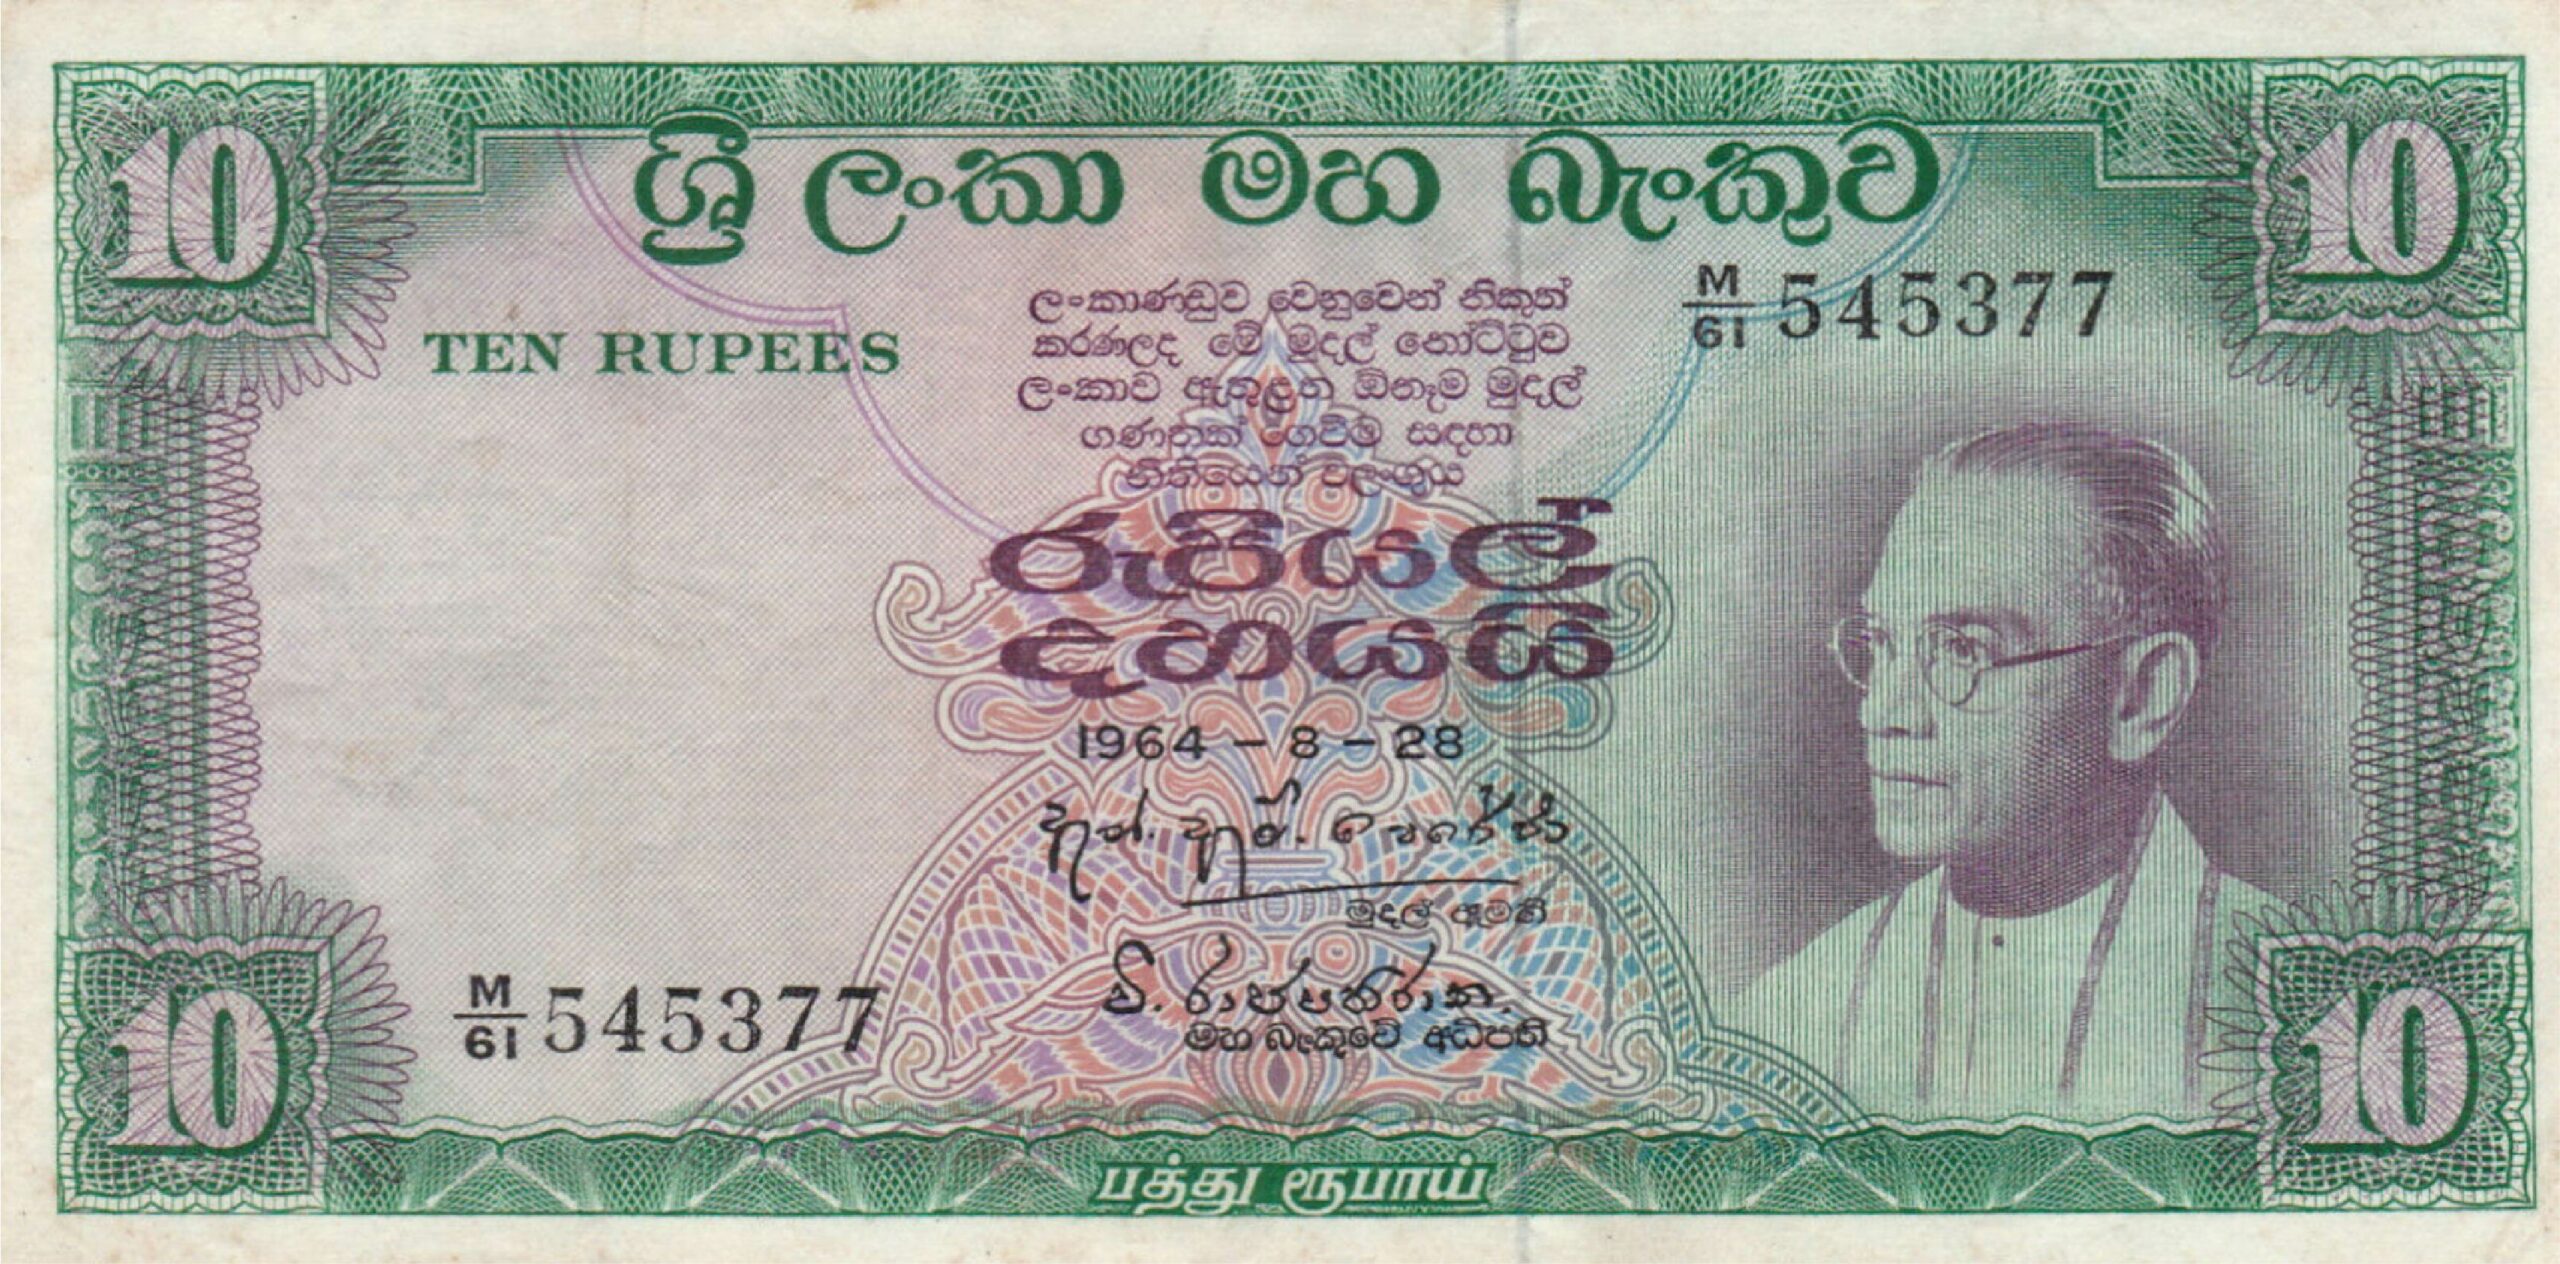 10 rupees Central Bank of Ceylon banknote (S.W.R.D. Bandaranaike portrait series)